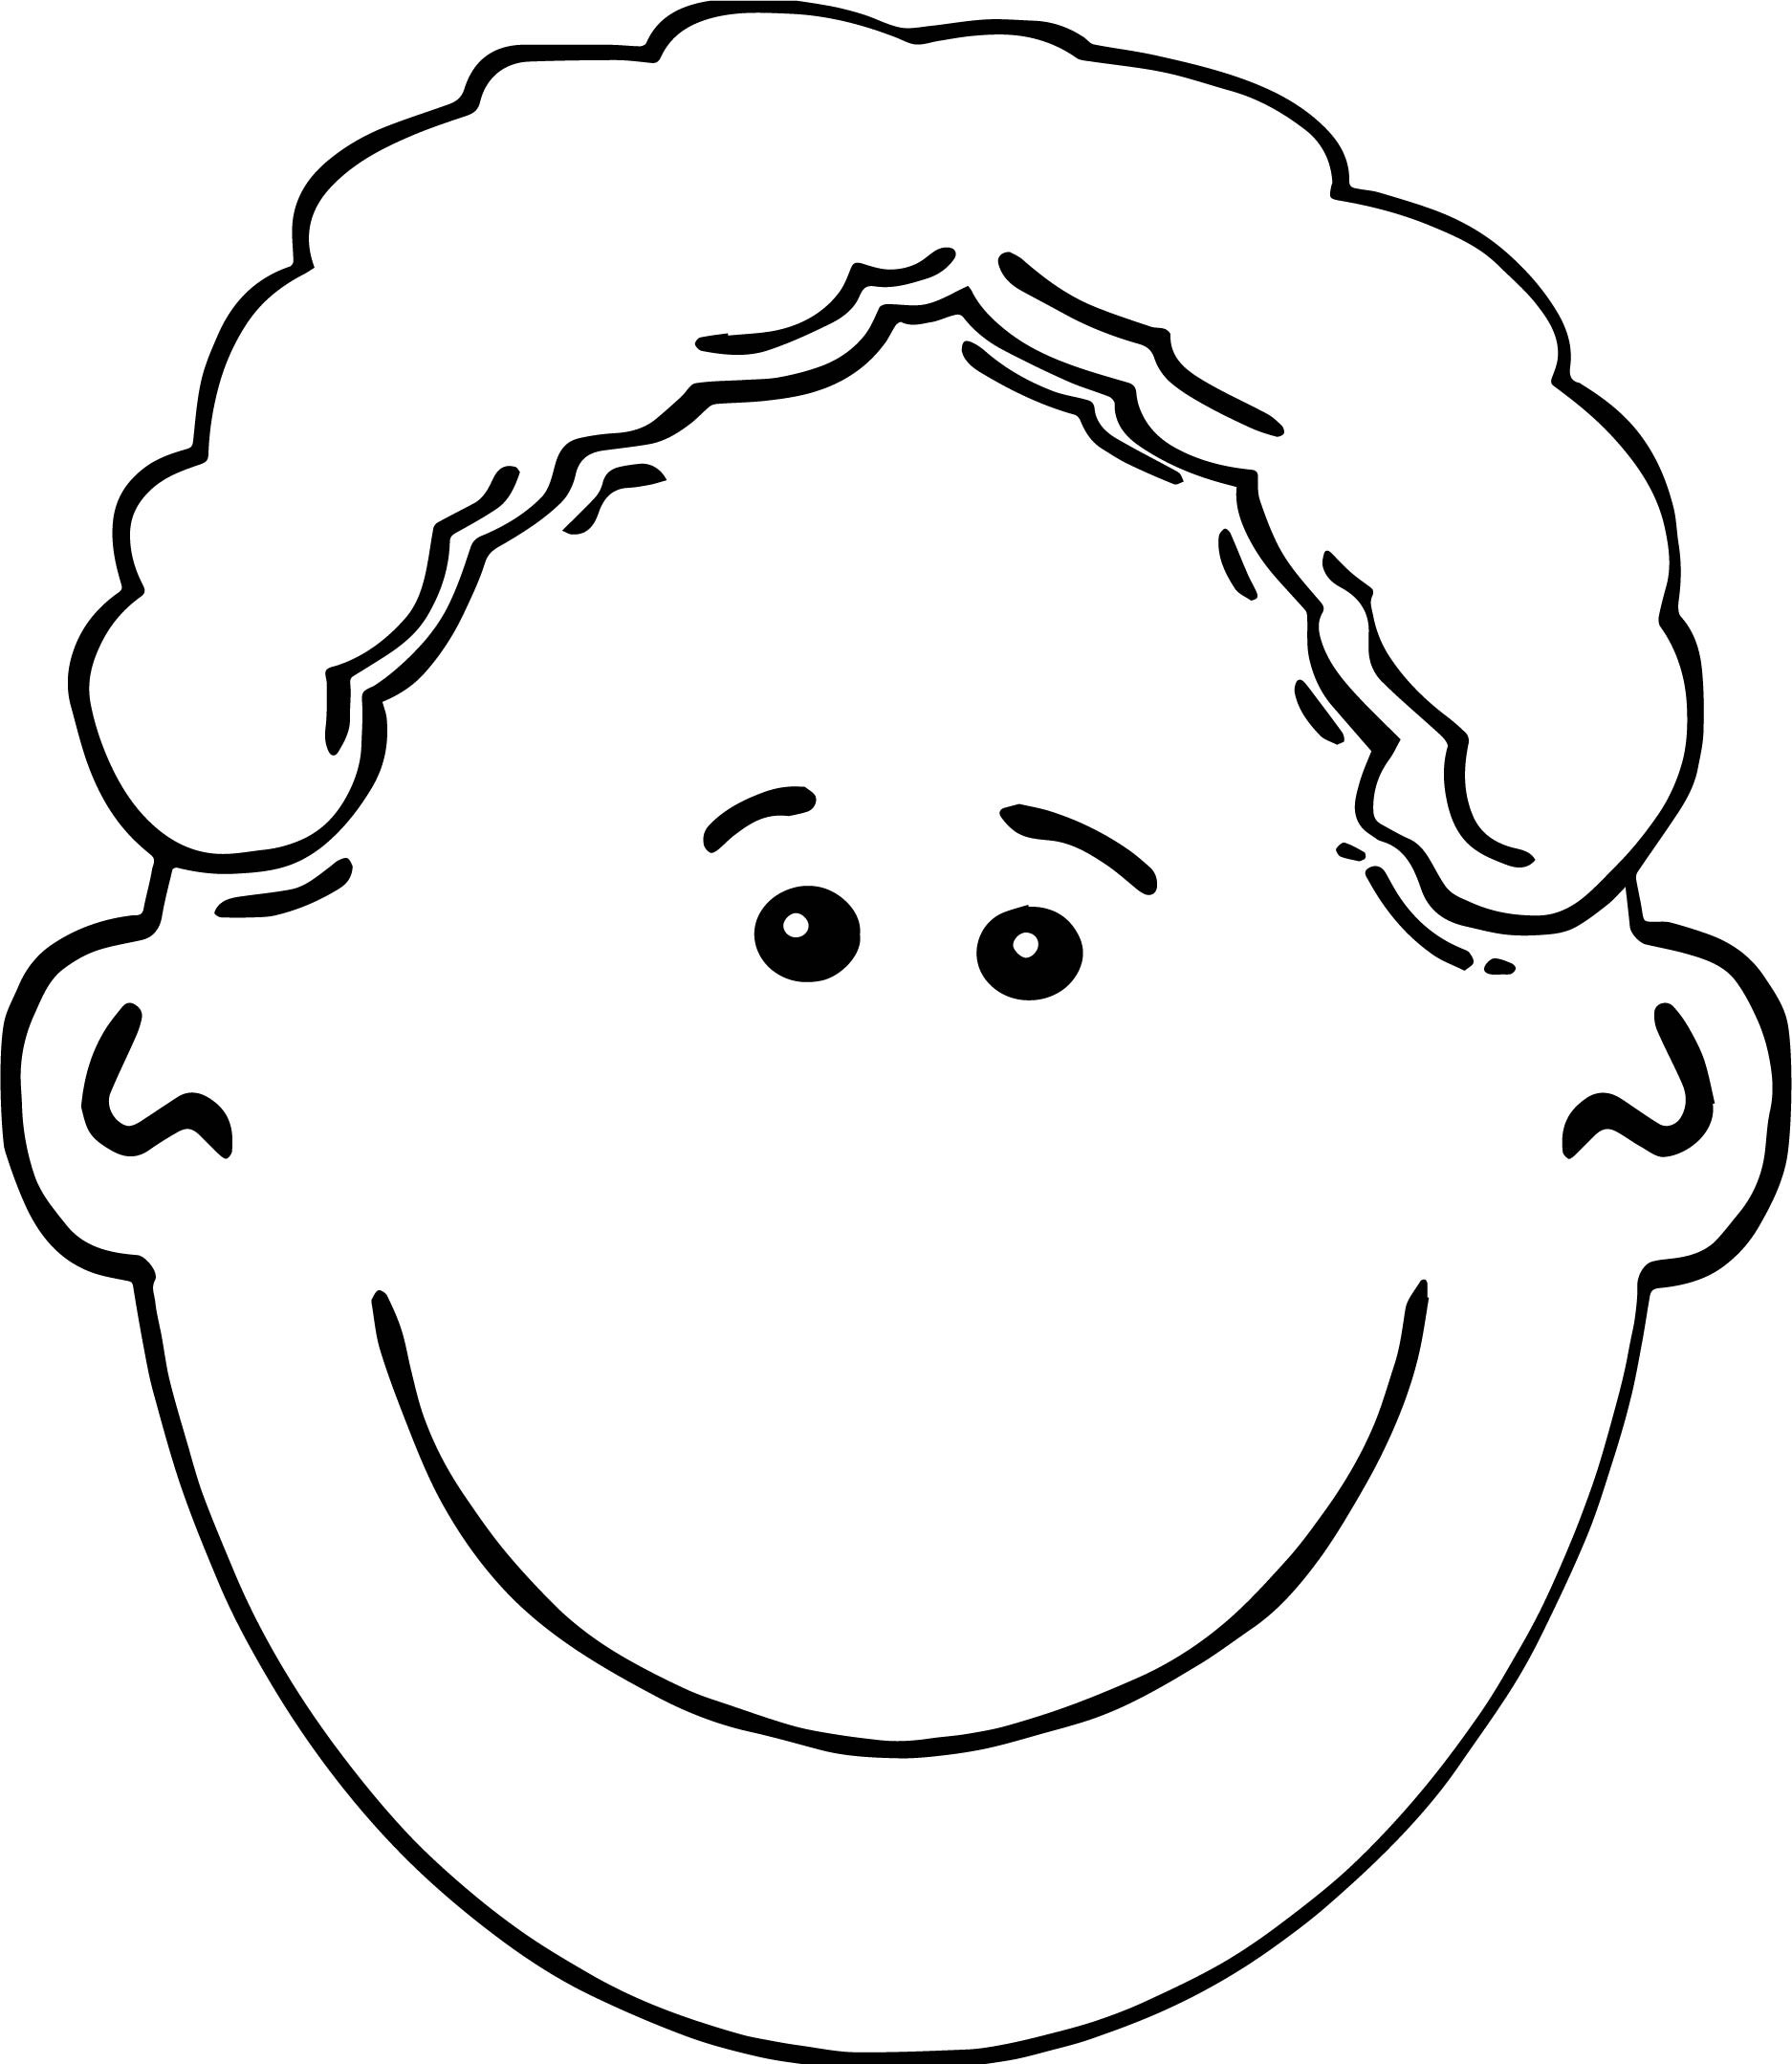 Boys Face Coloring Pages
 Big Boy Face Coloring Page